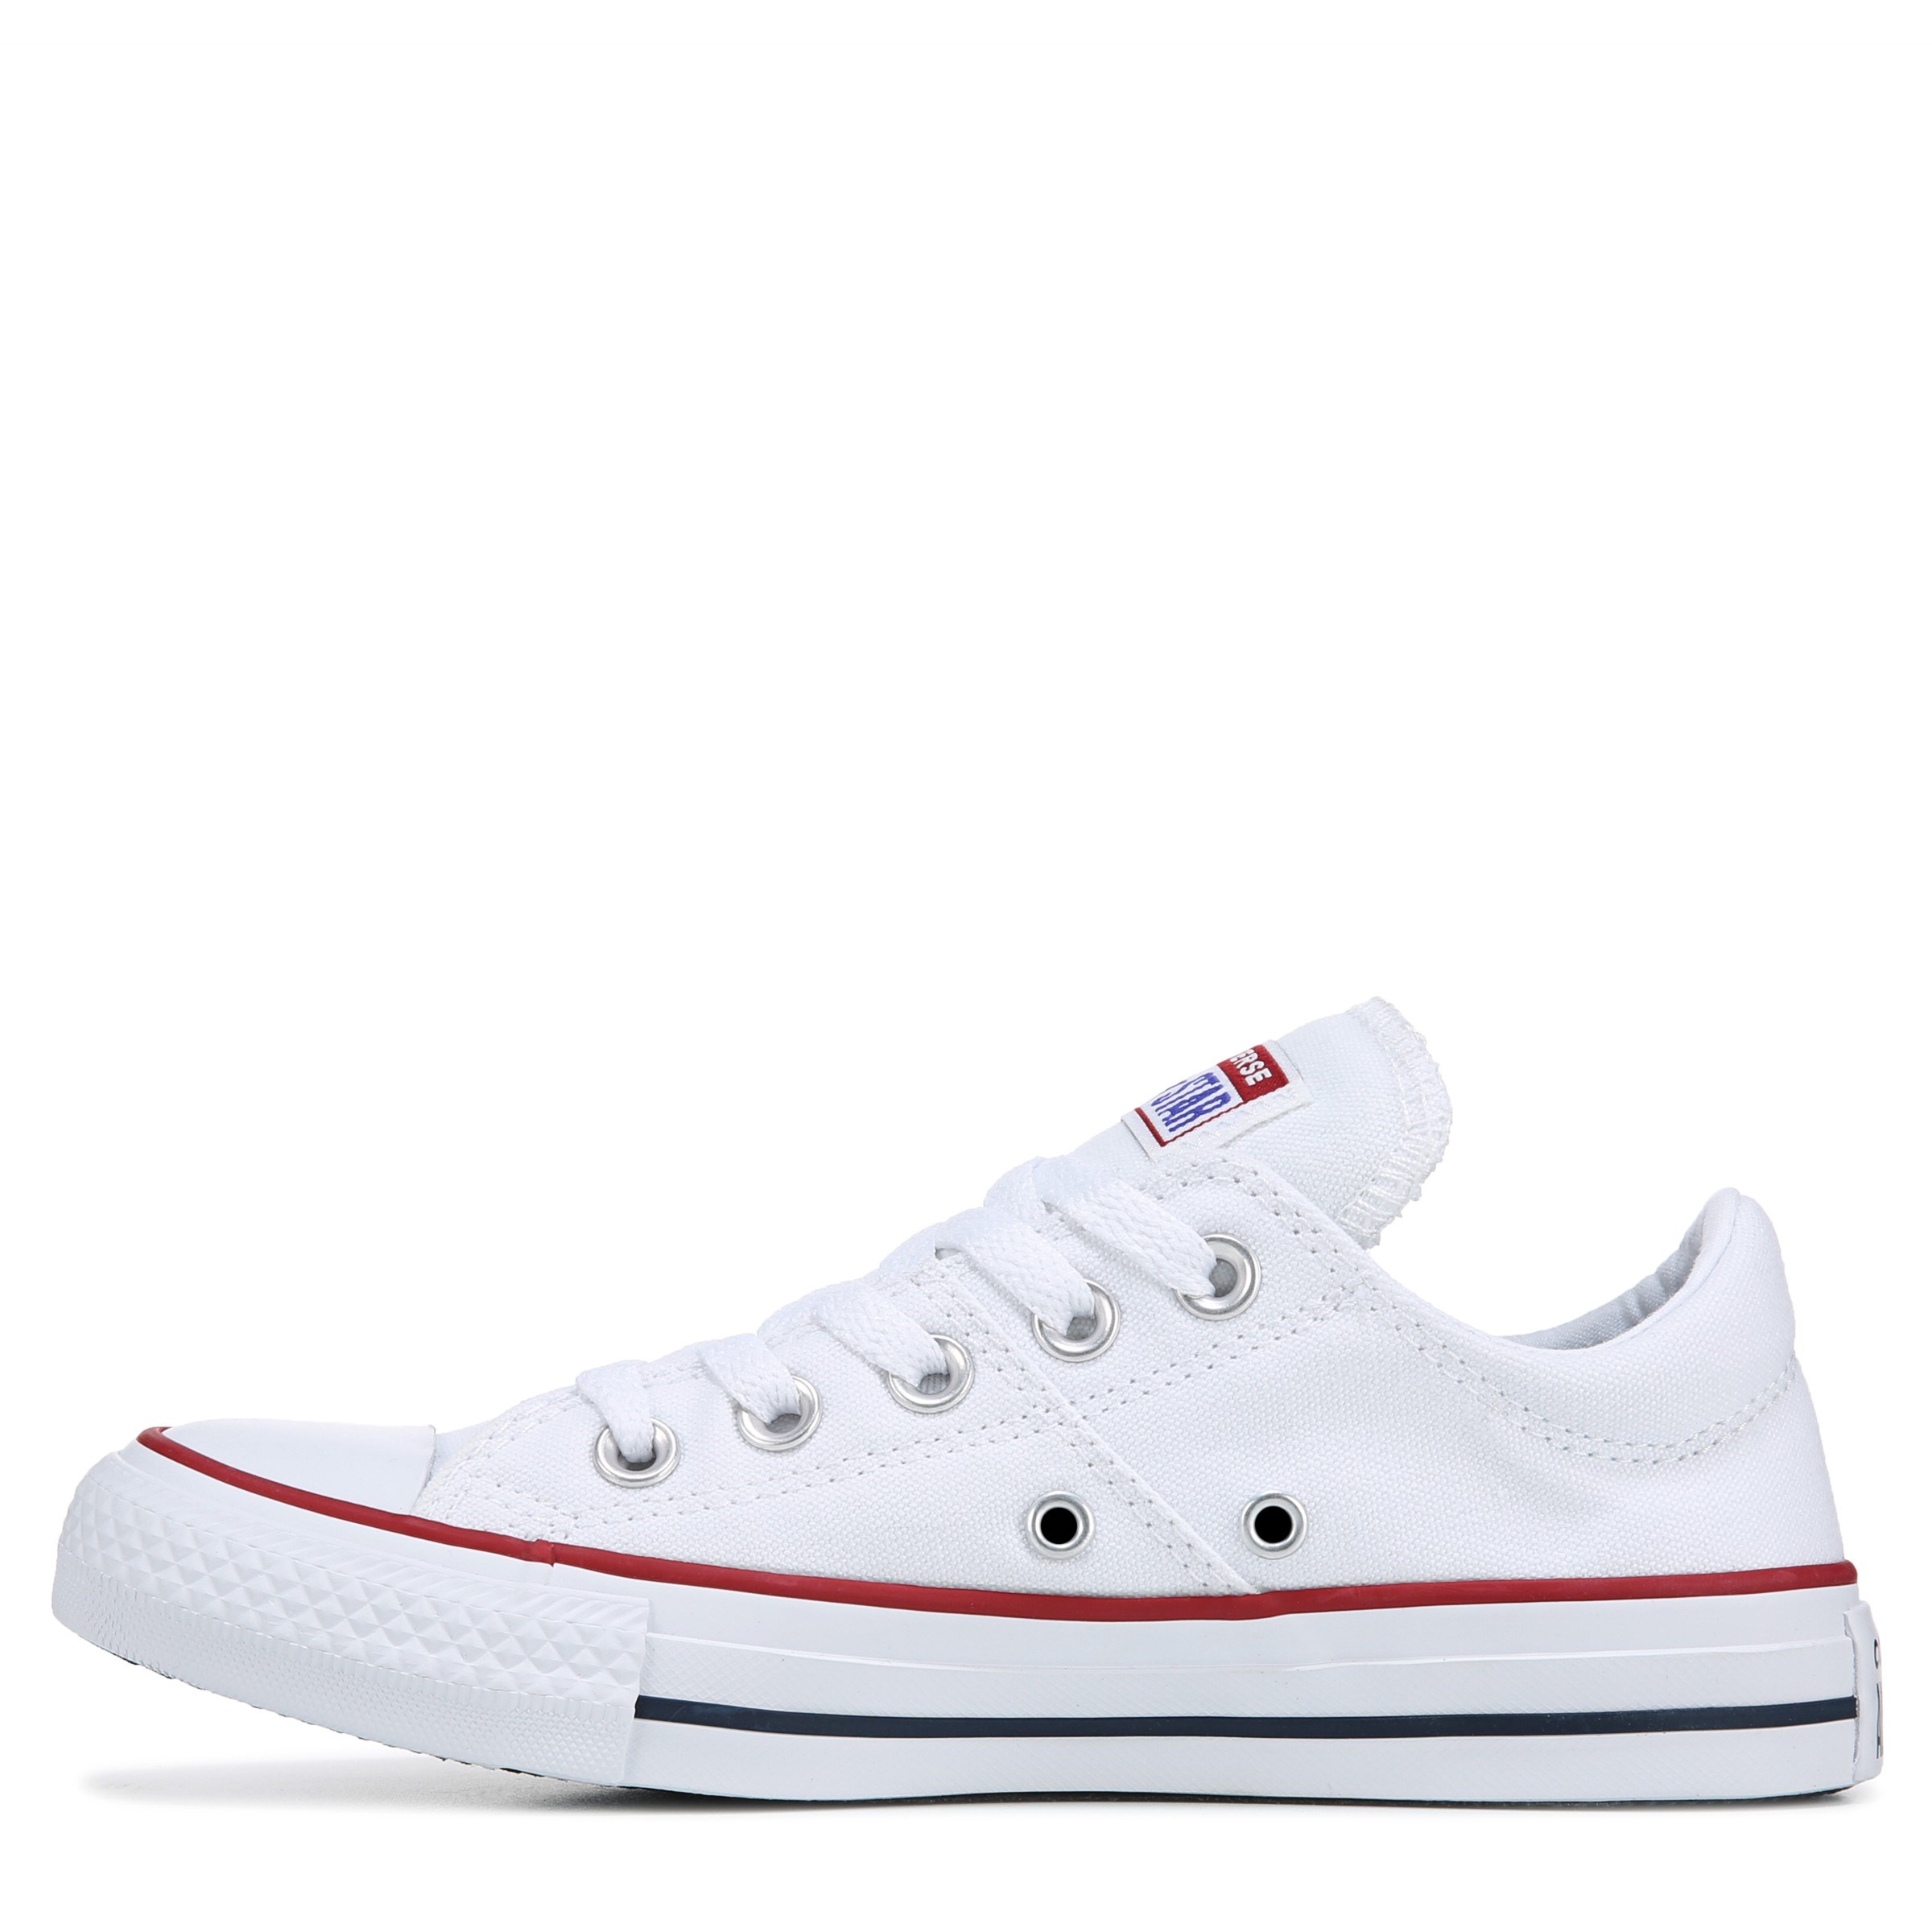 Converse Women's Chuck Taylor All Star Madison Low Top Sneakers